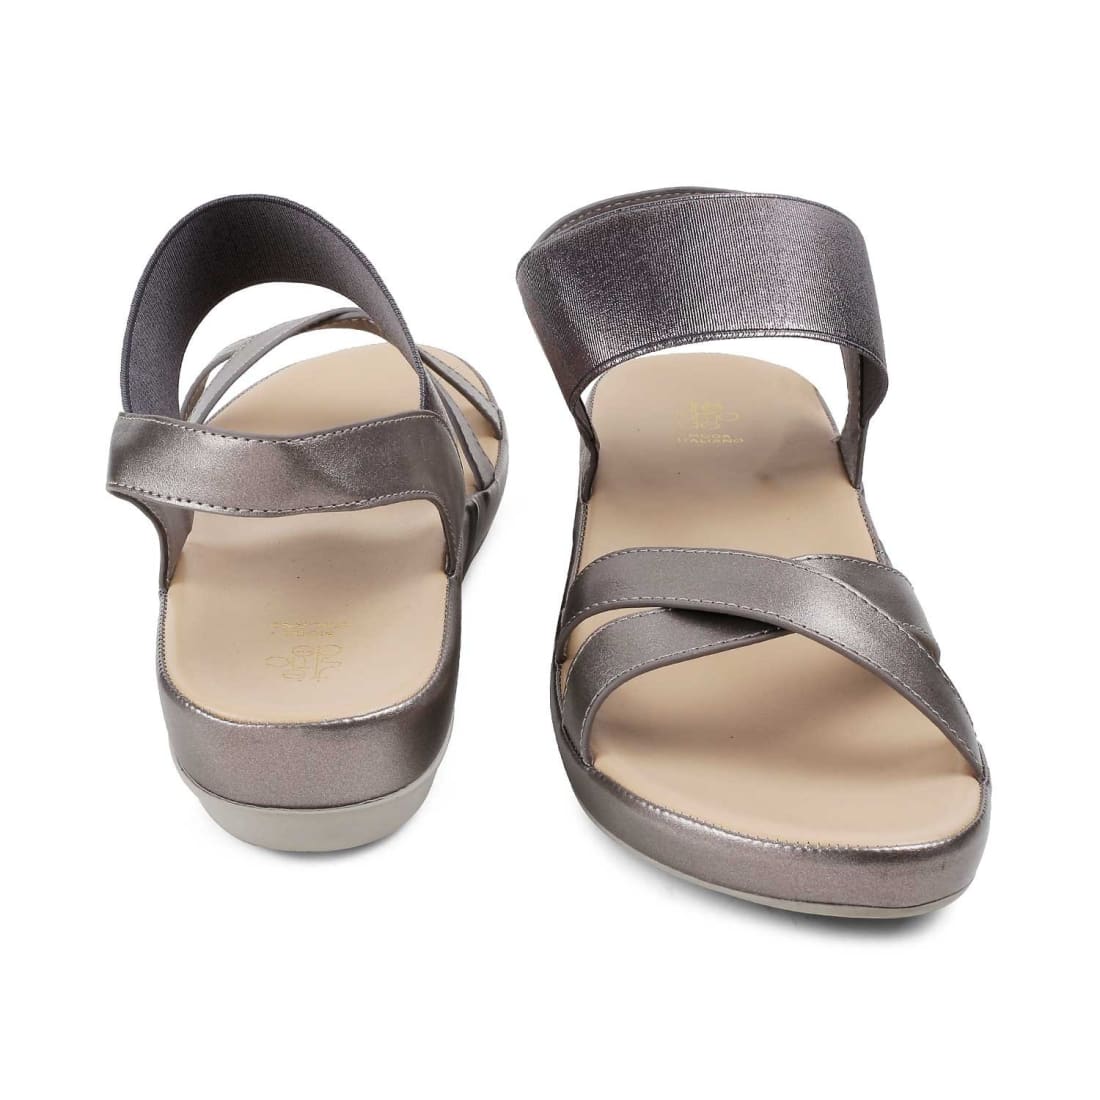 The Southee Pewter Women's Casual Wedge Sandals Tresmode - Tresmode